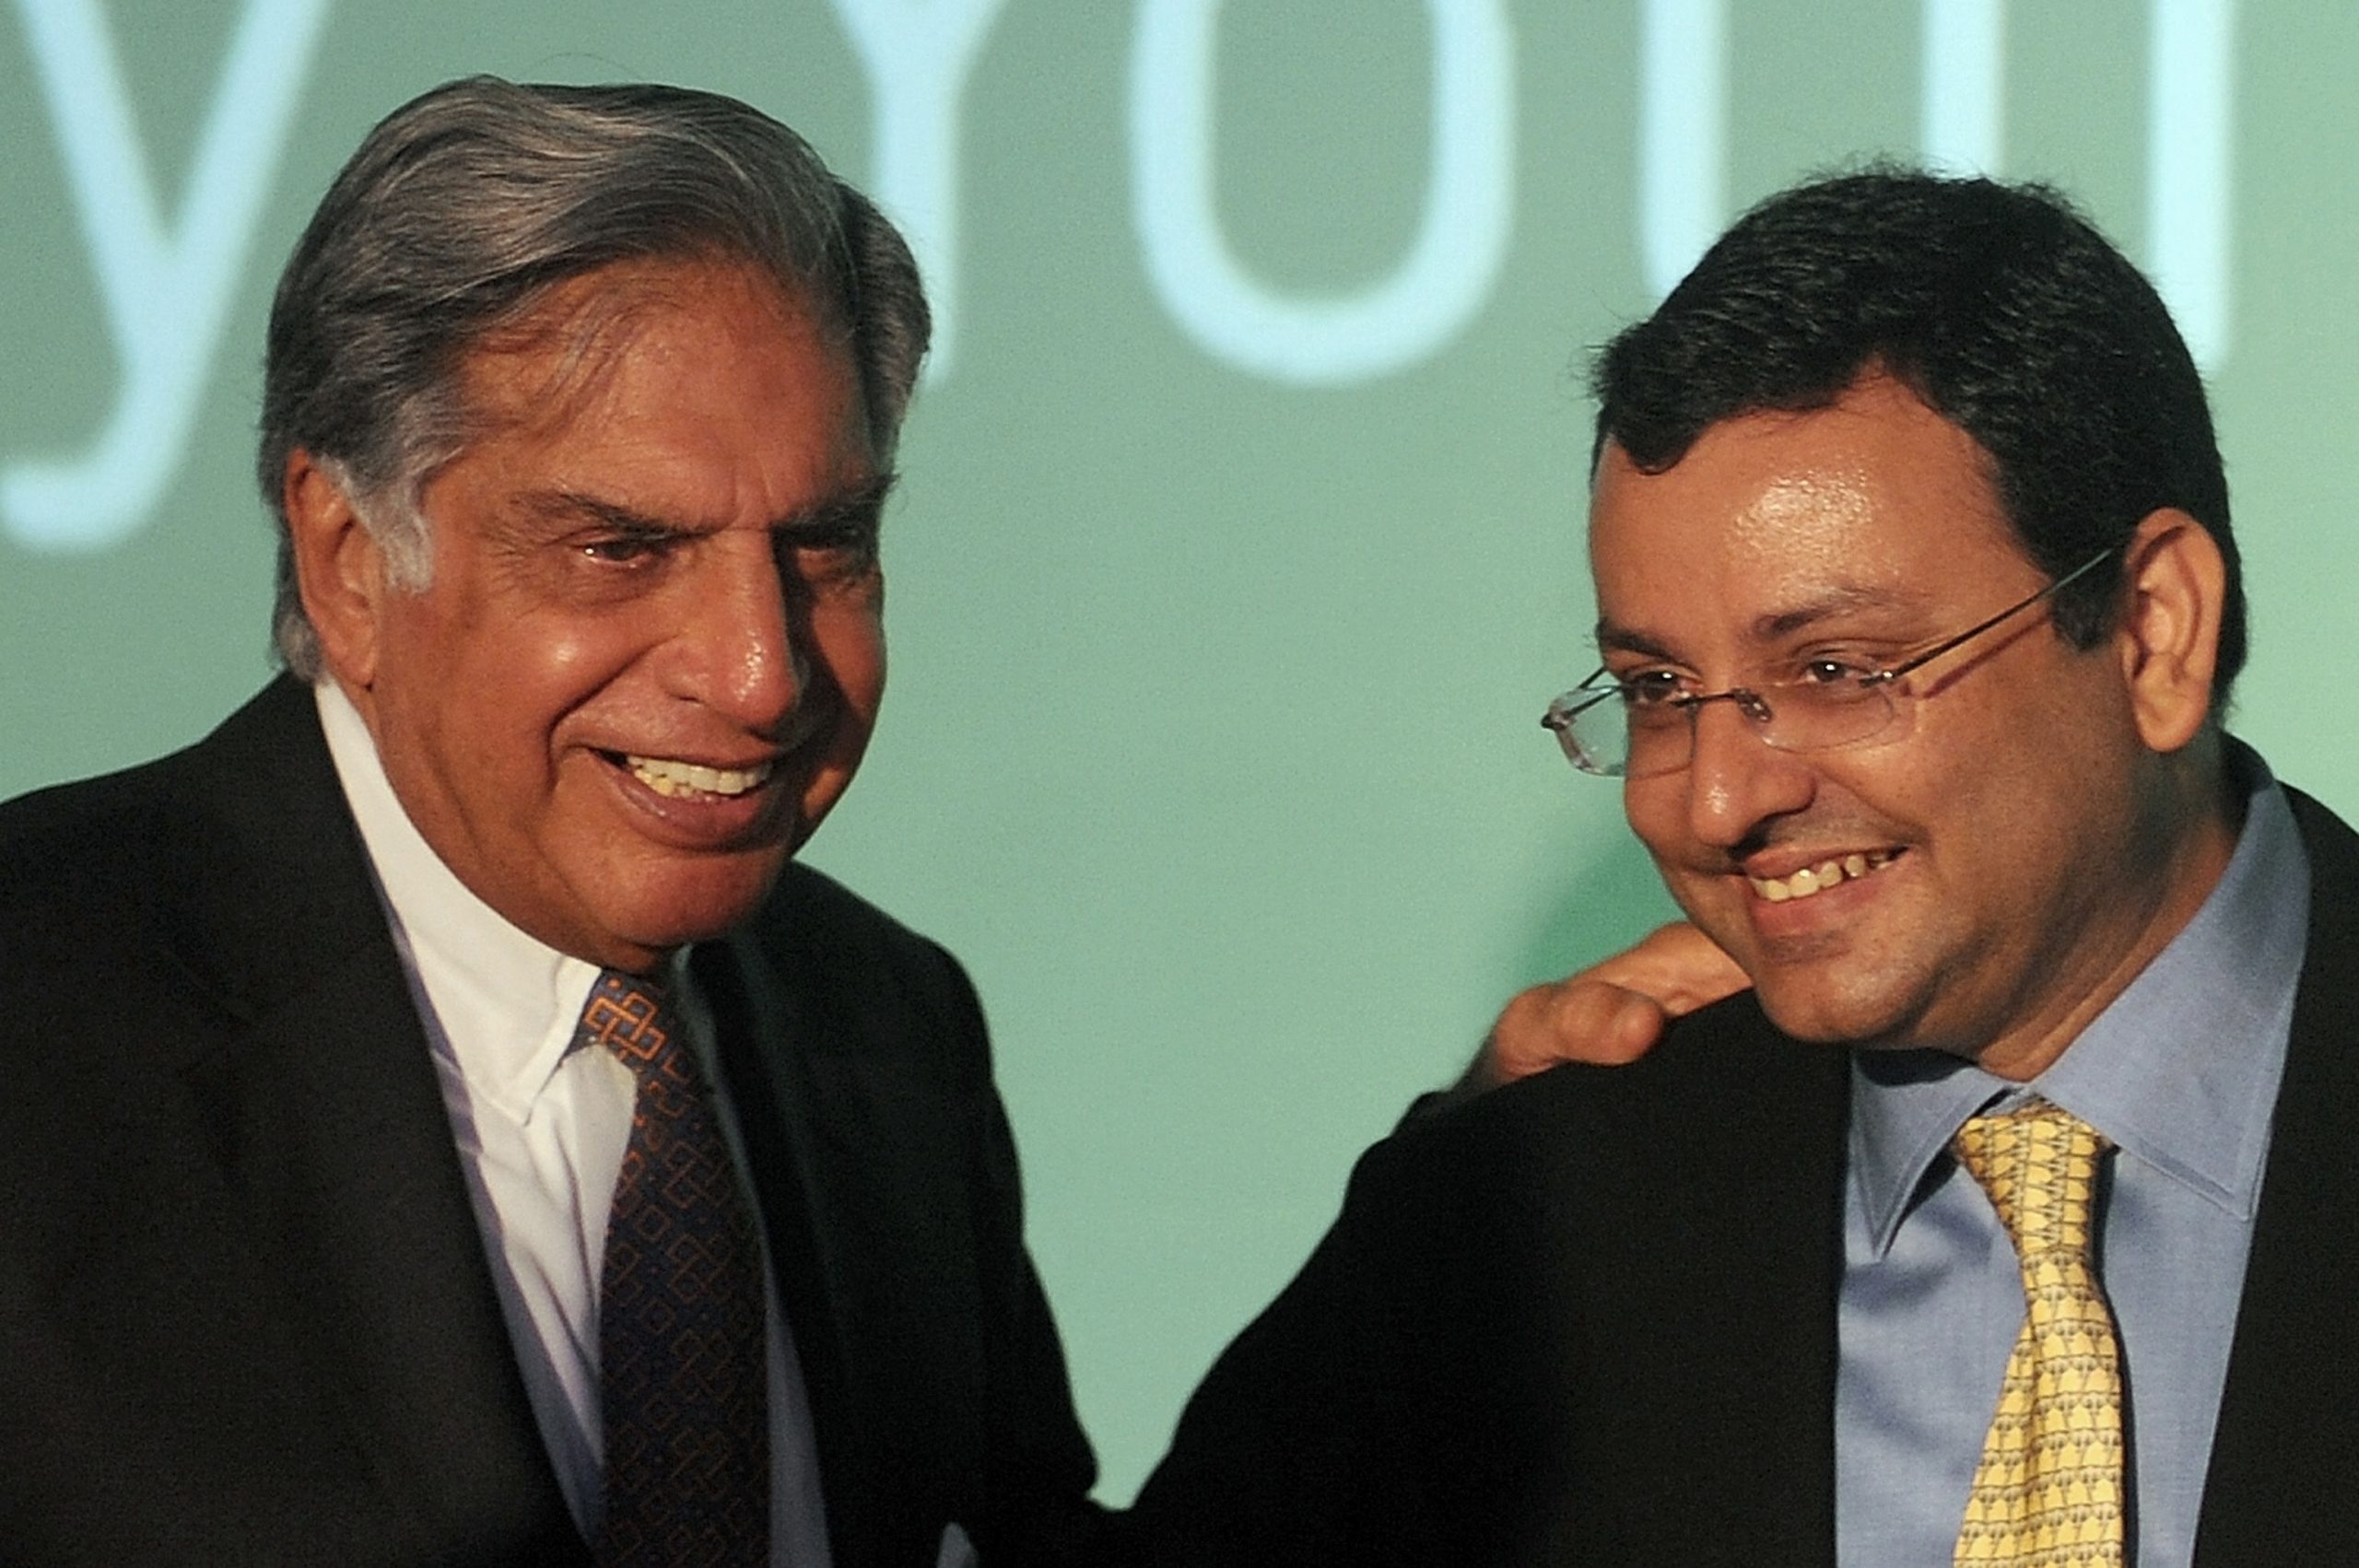 Chronology of events in Tata-Mistry case